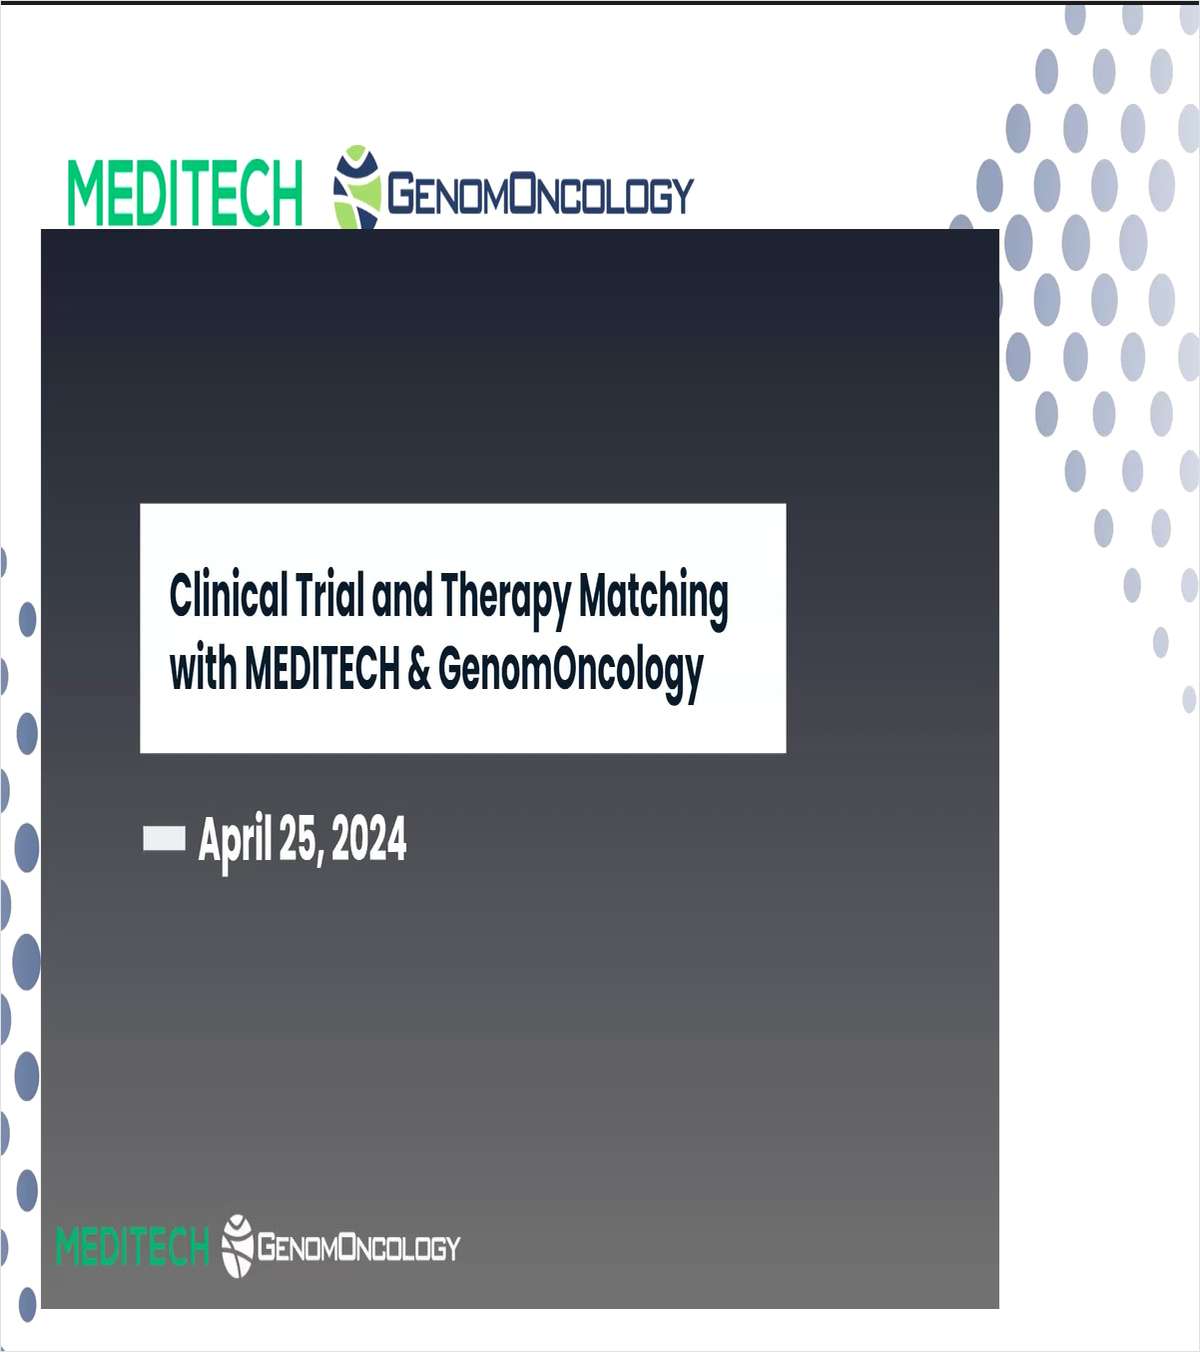 Therapies and Clinical Trial Matching with Meditech and GenomOncology